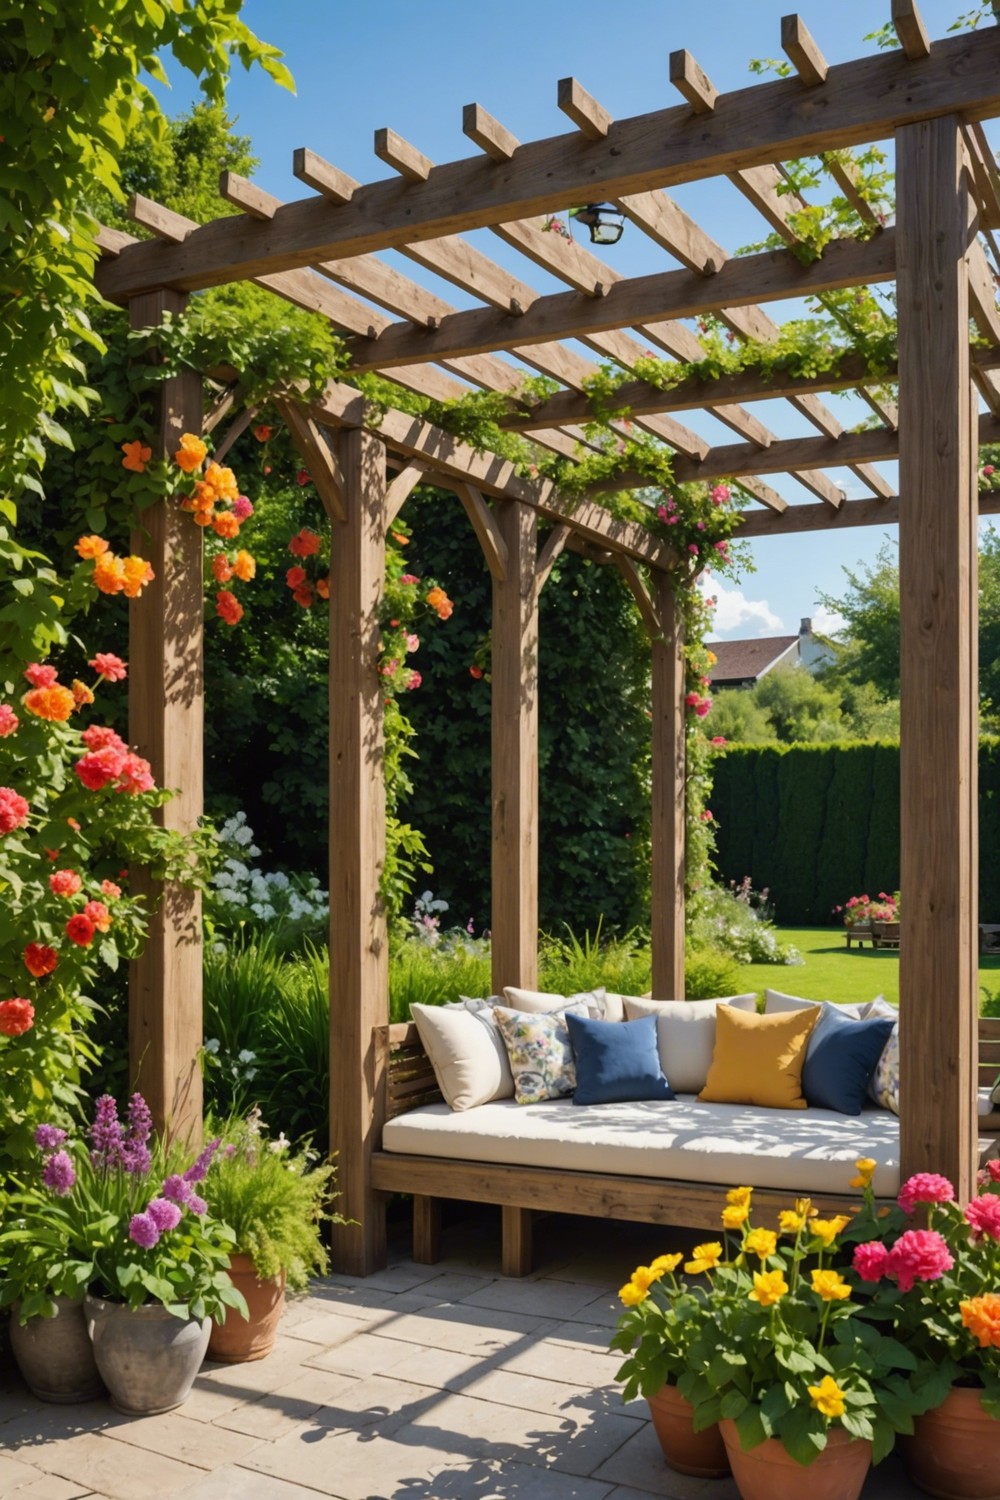 Large Pergola with Built-in Seating Area